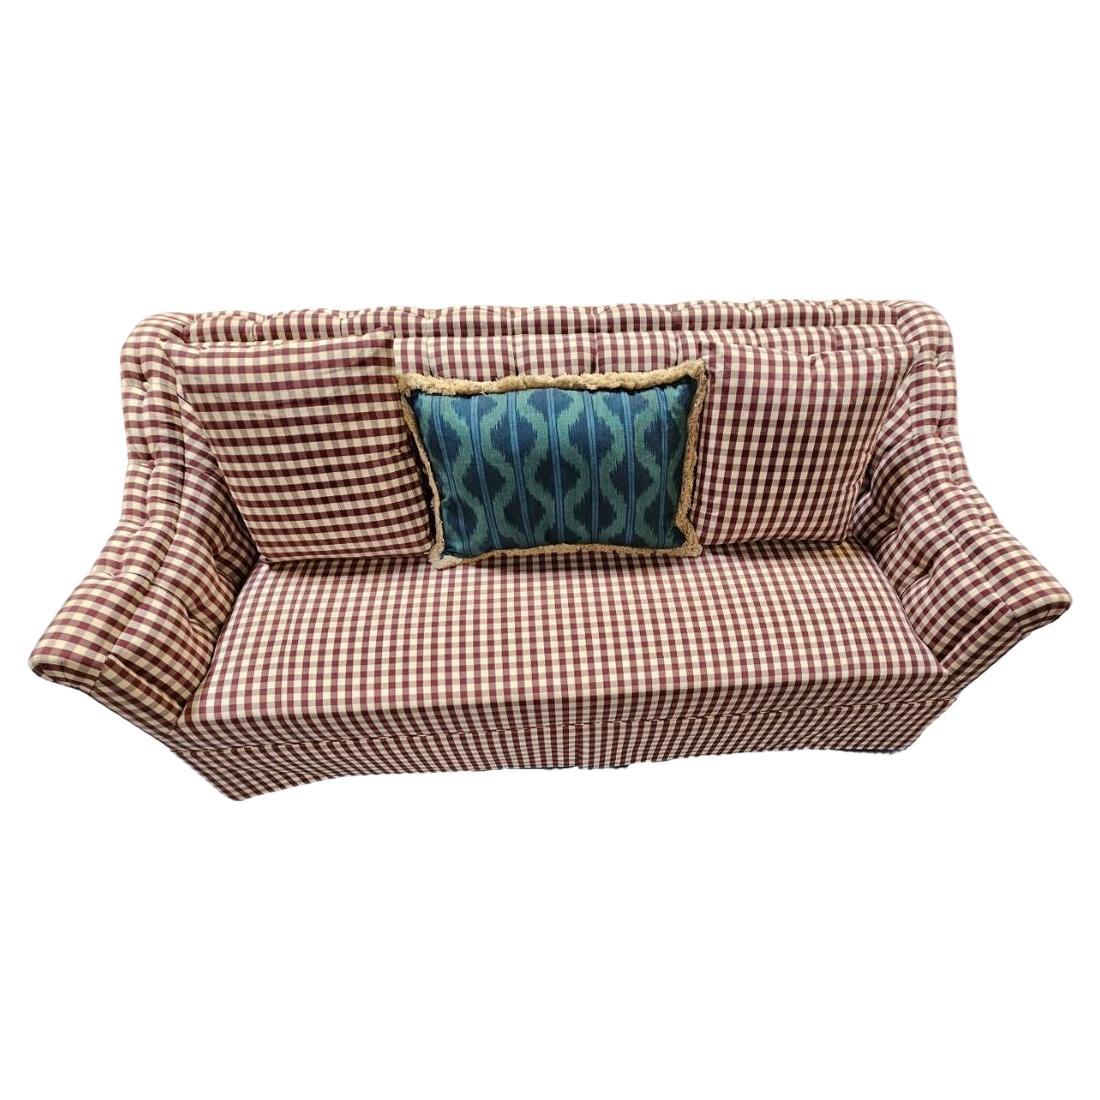 Tufted Skirted Sofa in Red Plaid 82 in W 37 in D 33 in H For Sale